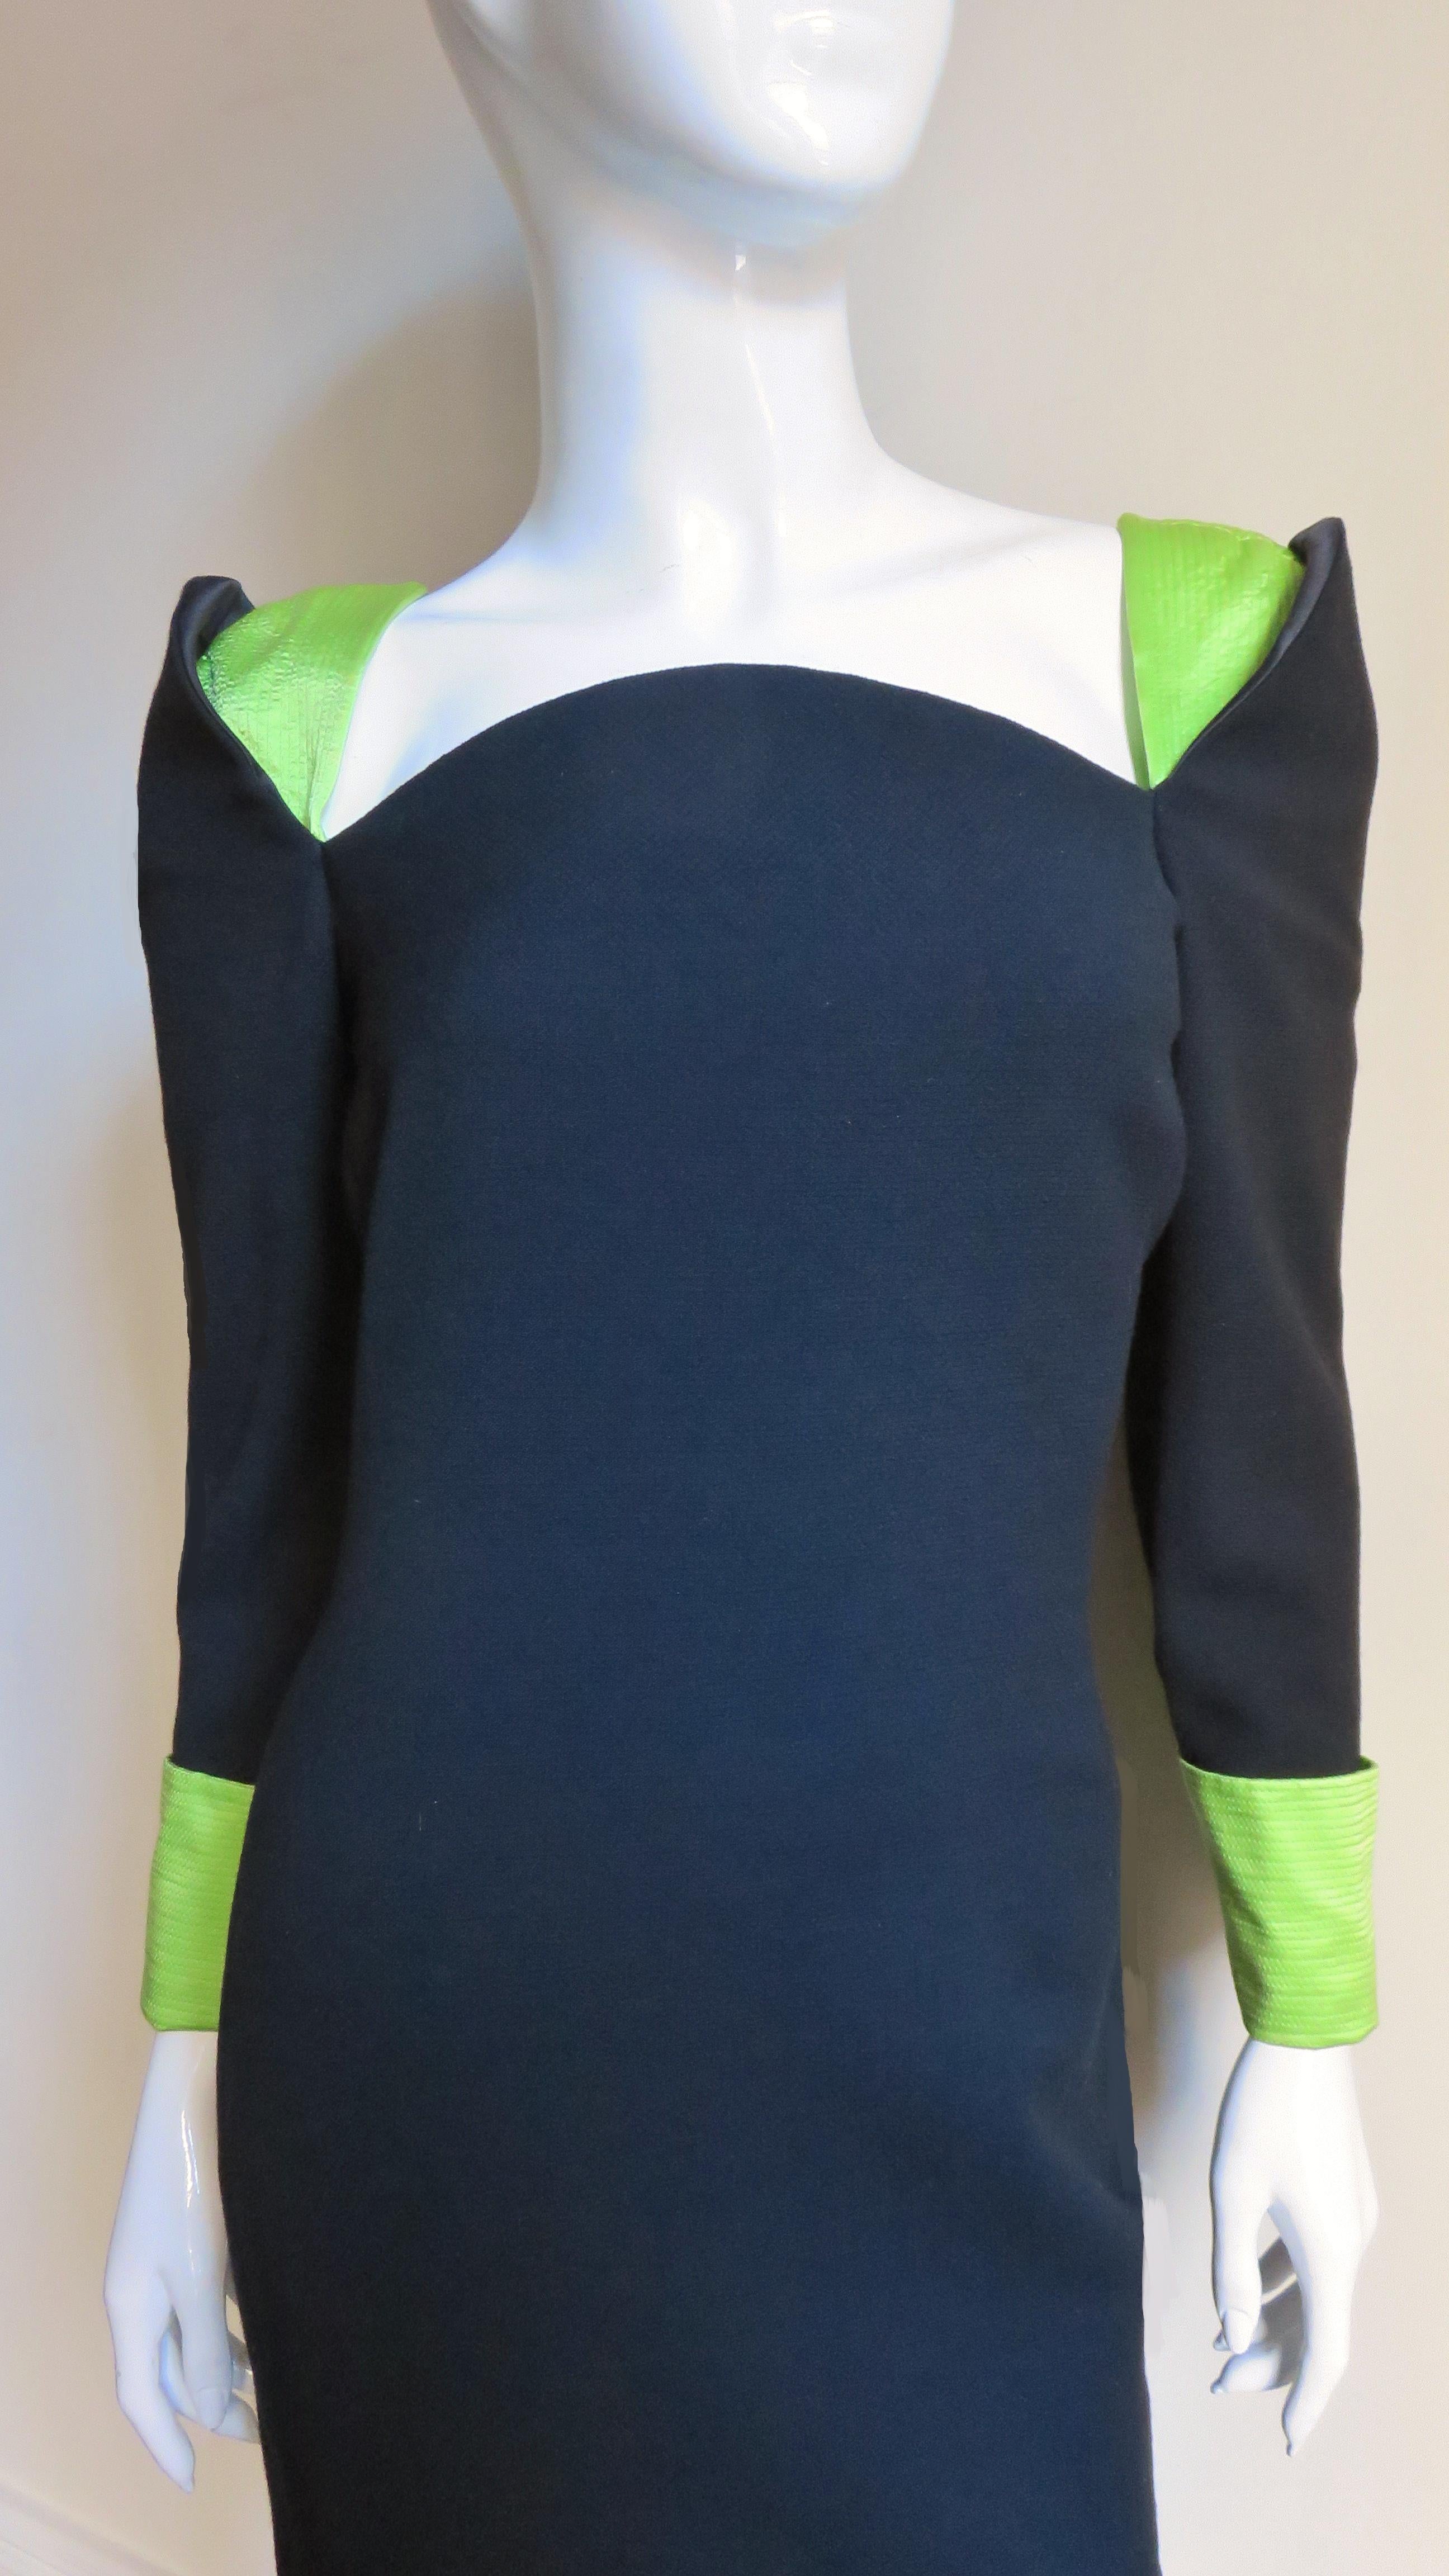 Gianni Versace Color Block Dress 1980s In Good Condition For Sale In Water Mill, NY